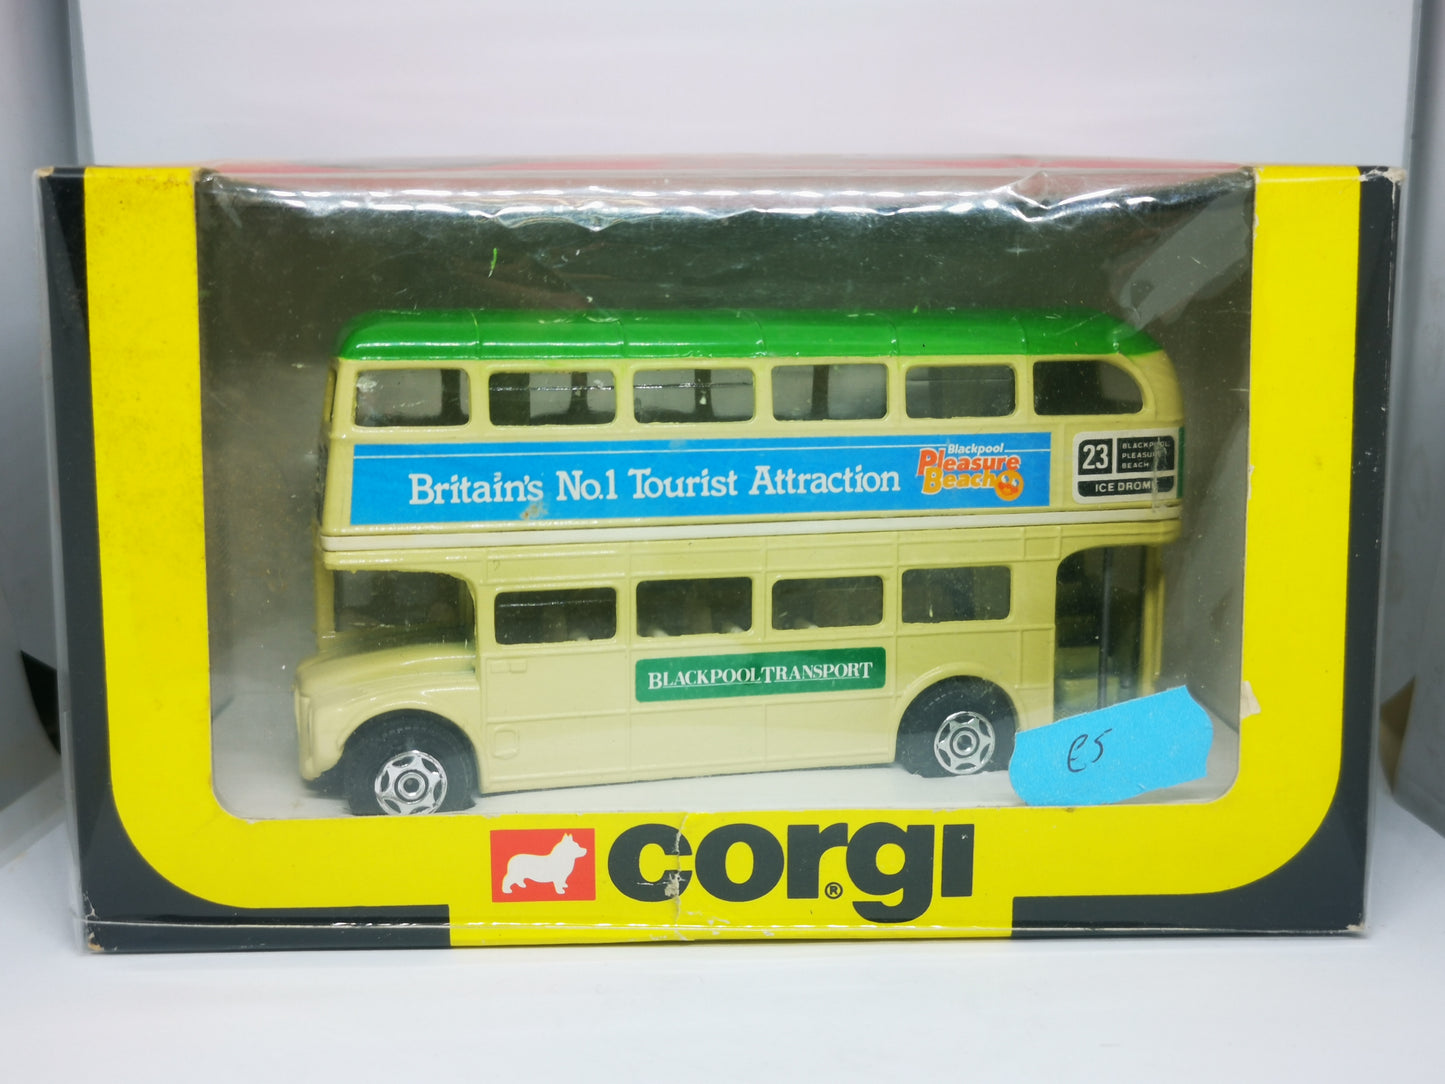 Corgi 469 London Routemaster Double Deck Bus Made in Great Britain